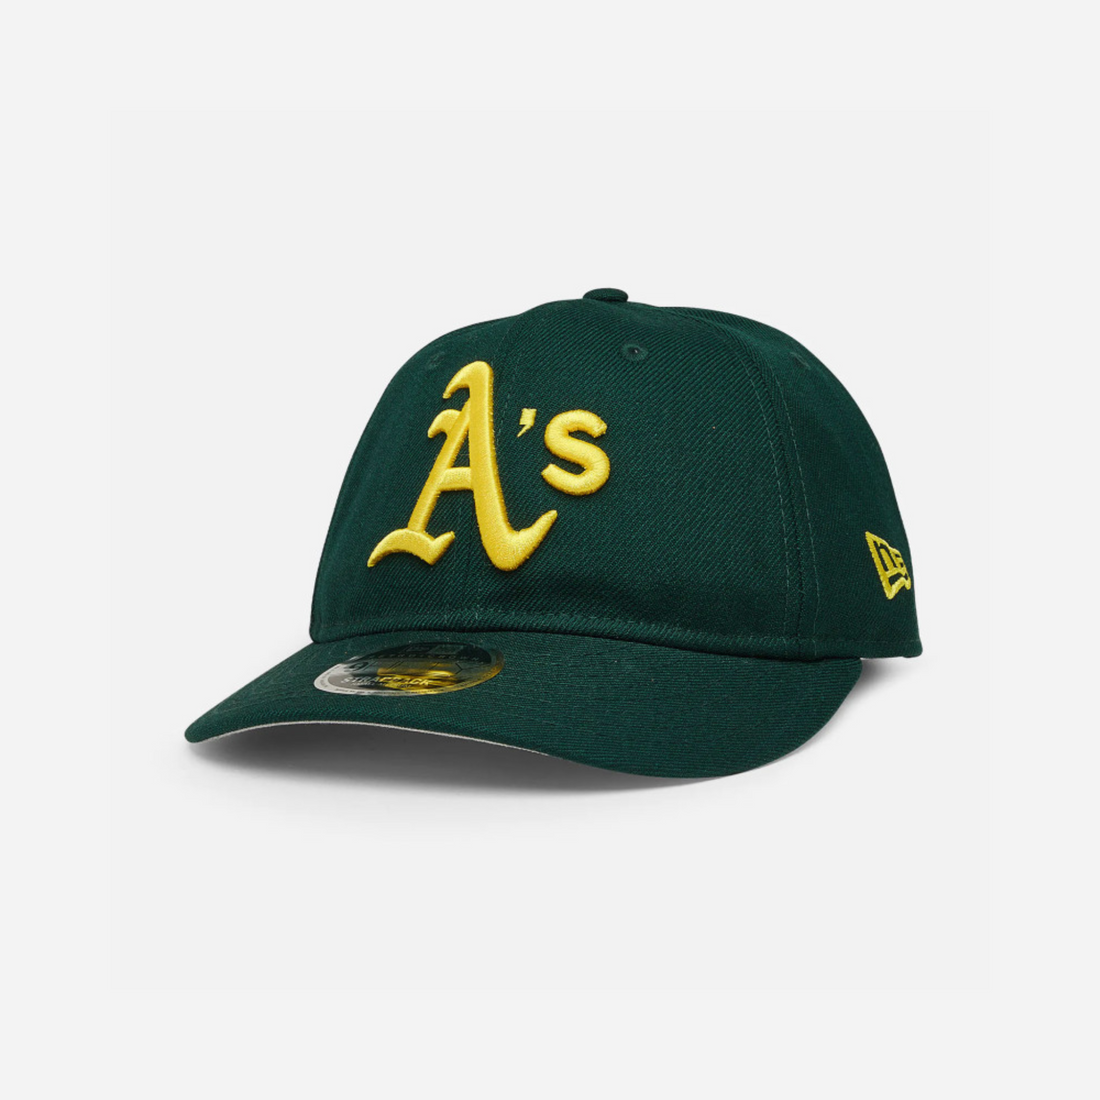 New Era Oakland Athletics Coops Patch 9FIFTY - Hympala Store 